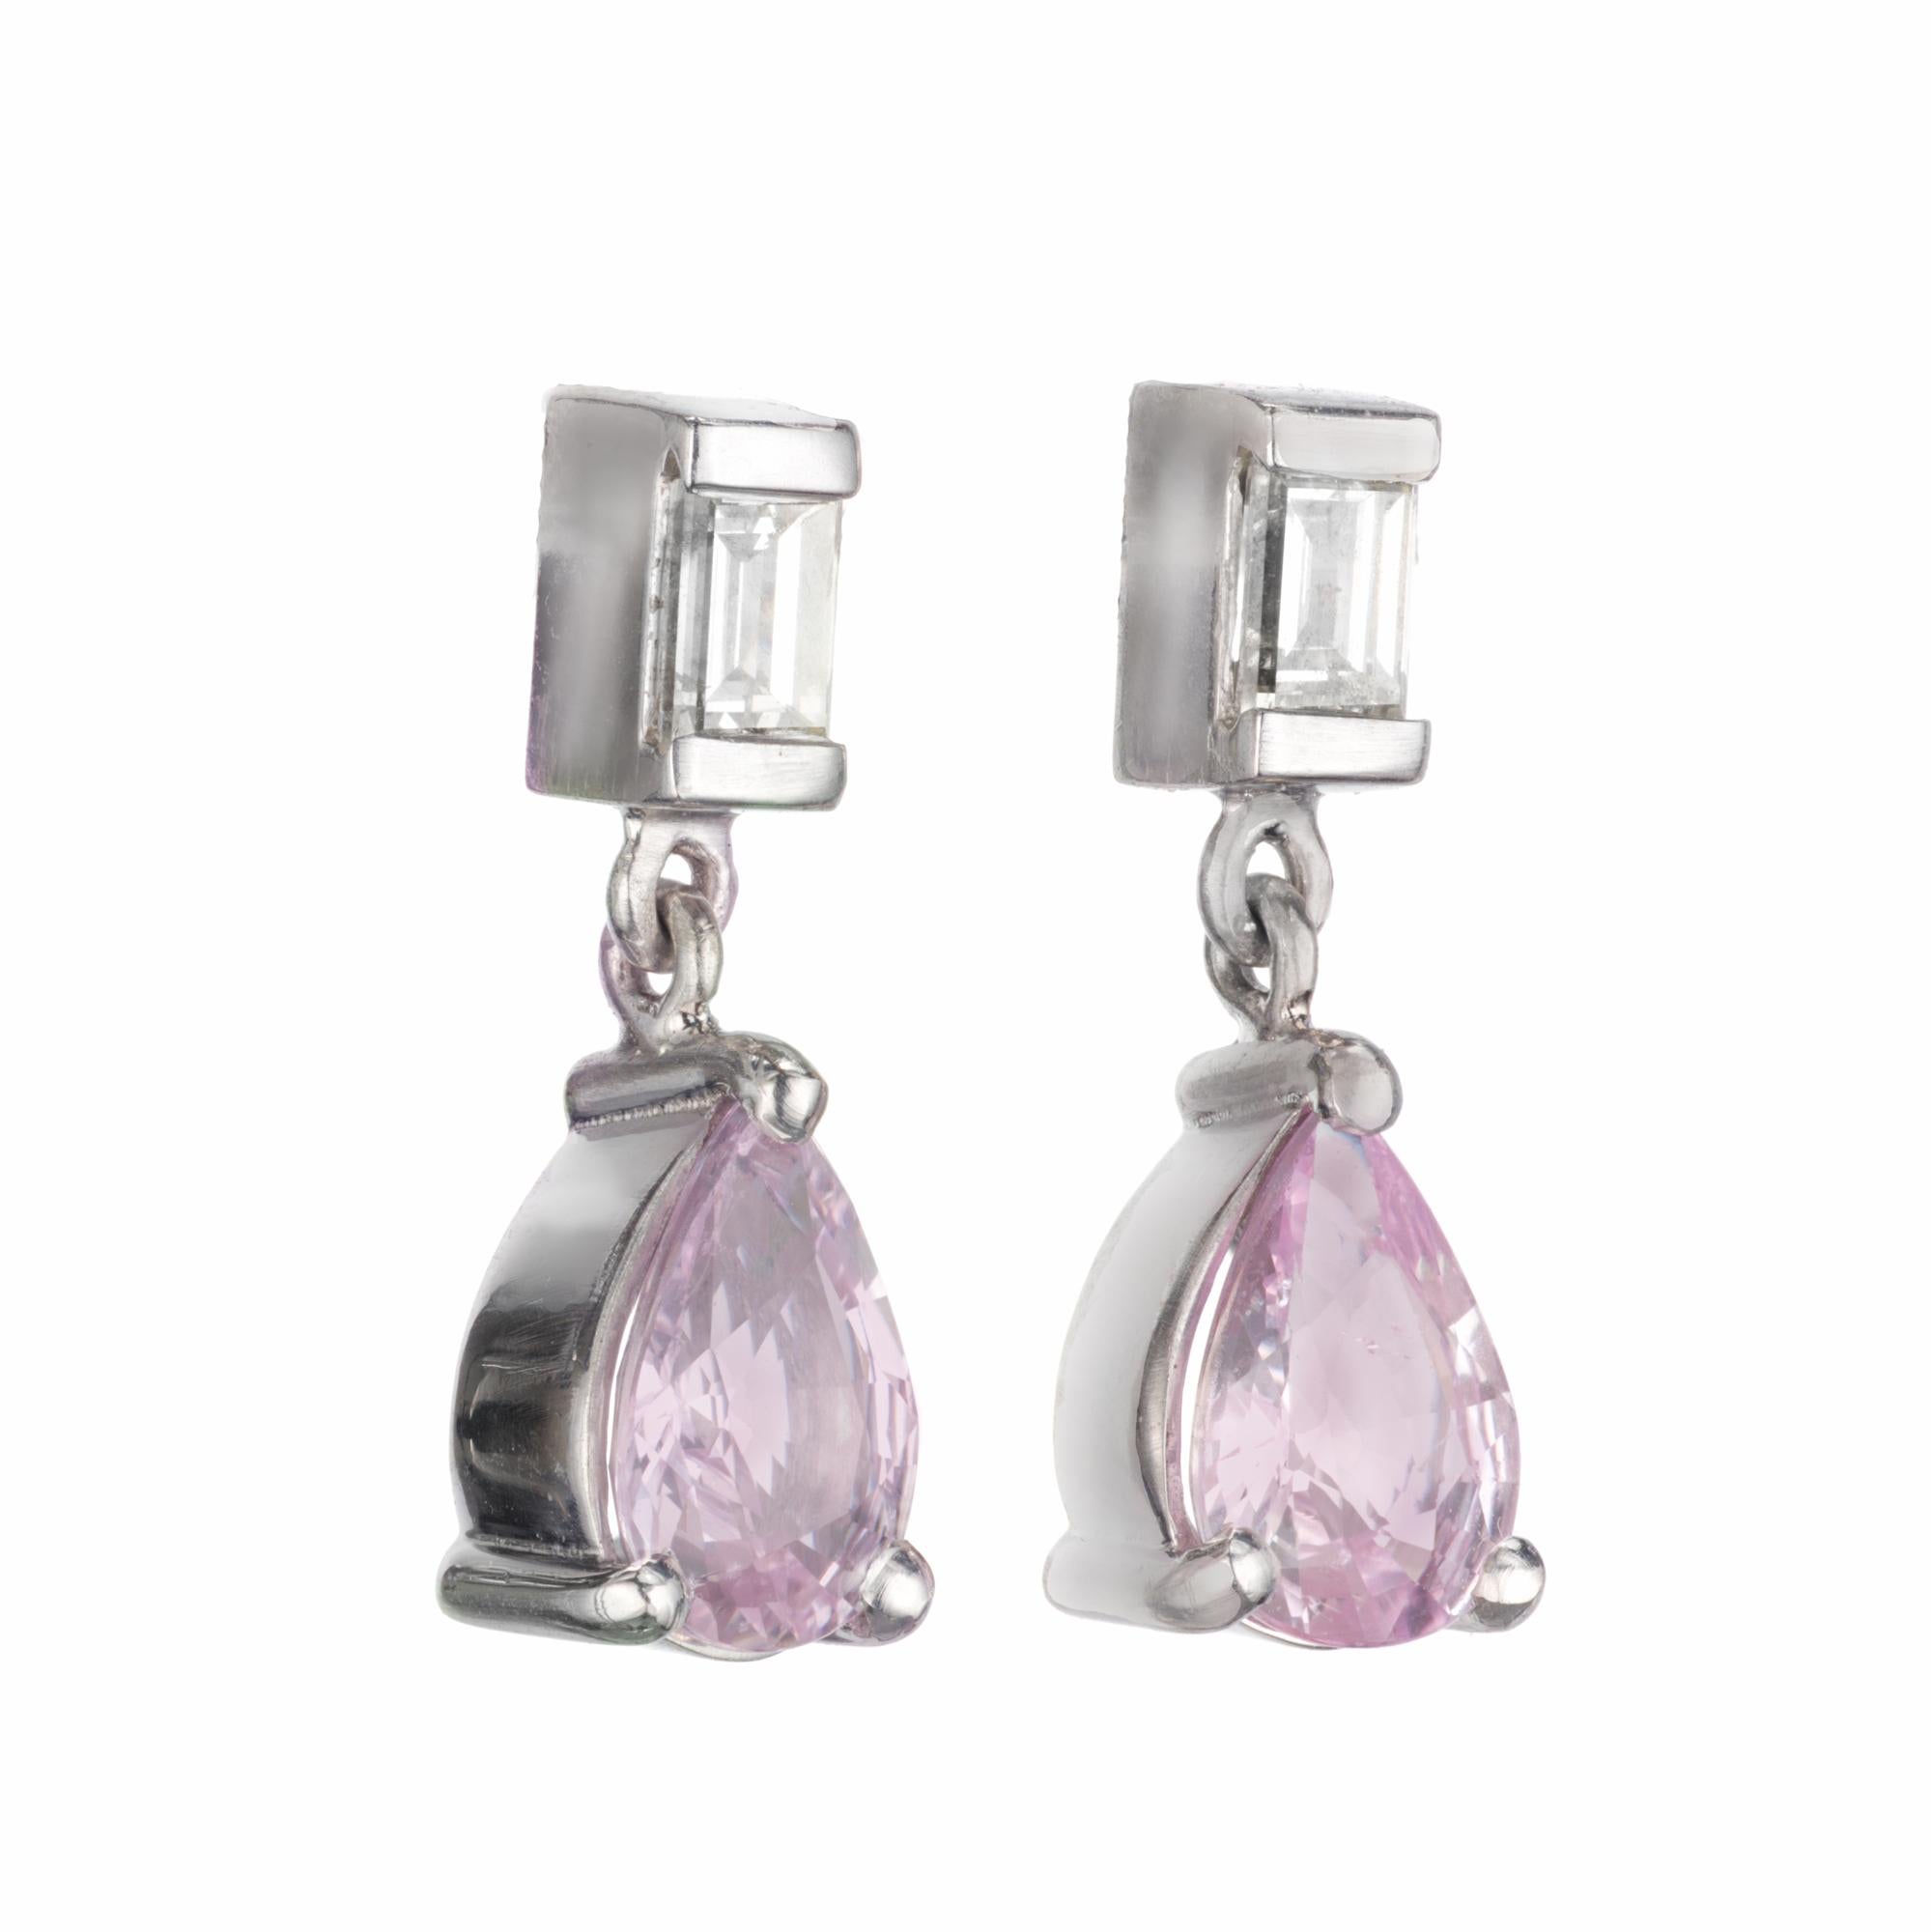 Pink sapphire and diamond dangle earrings. Soft pink pear shape sapphires from an 1940's estate. Set in classic platinum setting with two baguette accent diamonds. Picked at random tested as natural no heat by the GIA. 

2 pear shaped very light